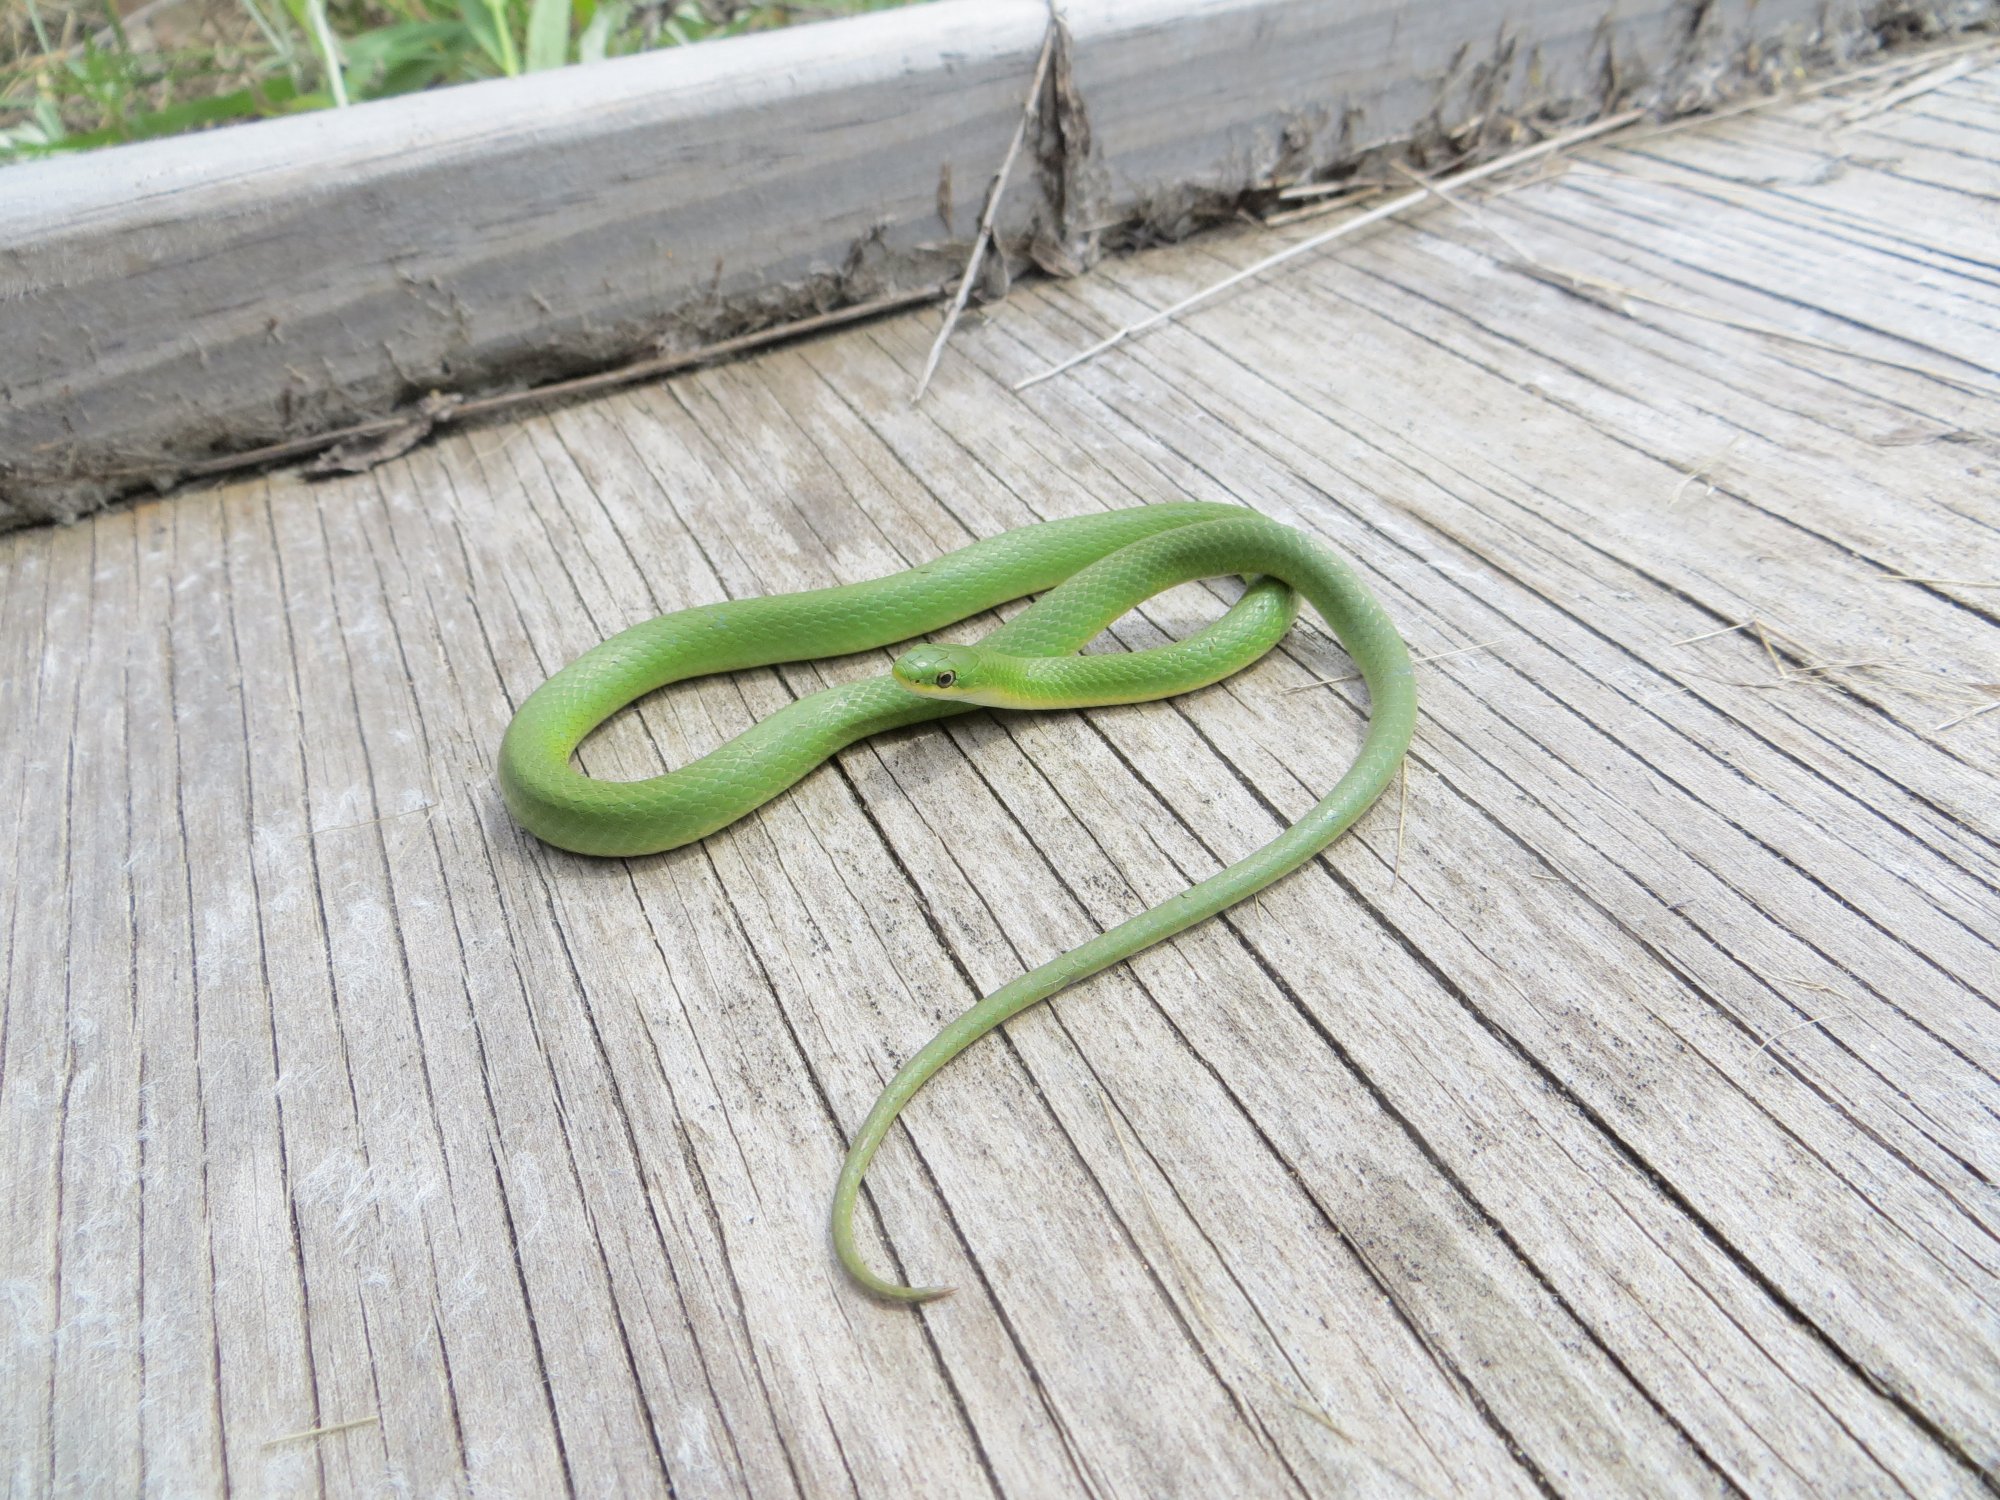 Smooth Green Snake (Opheodrys vernalis) - Reptiles and Amphibians of ...